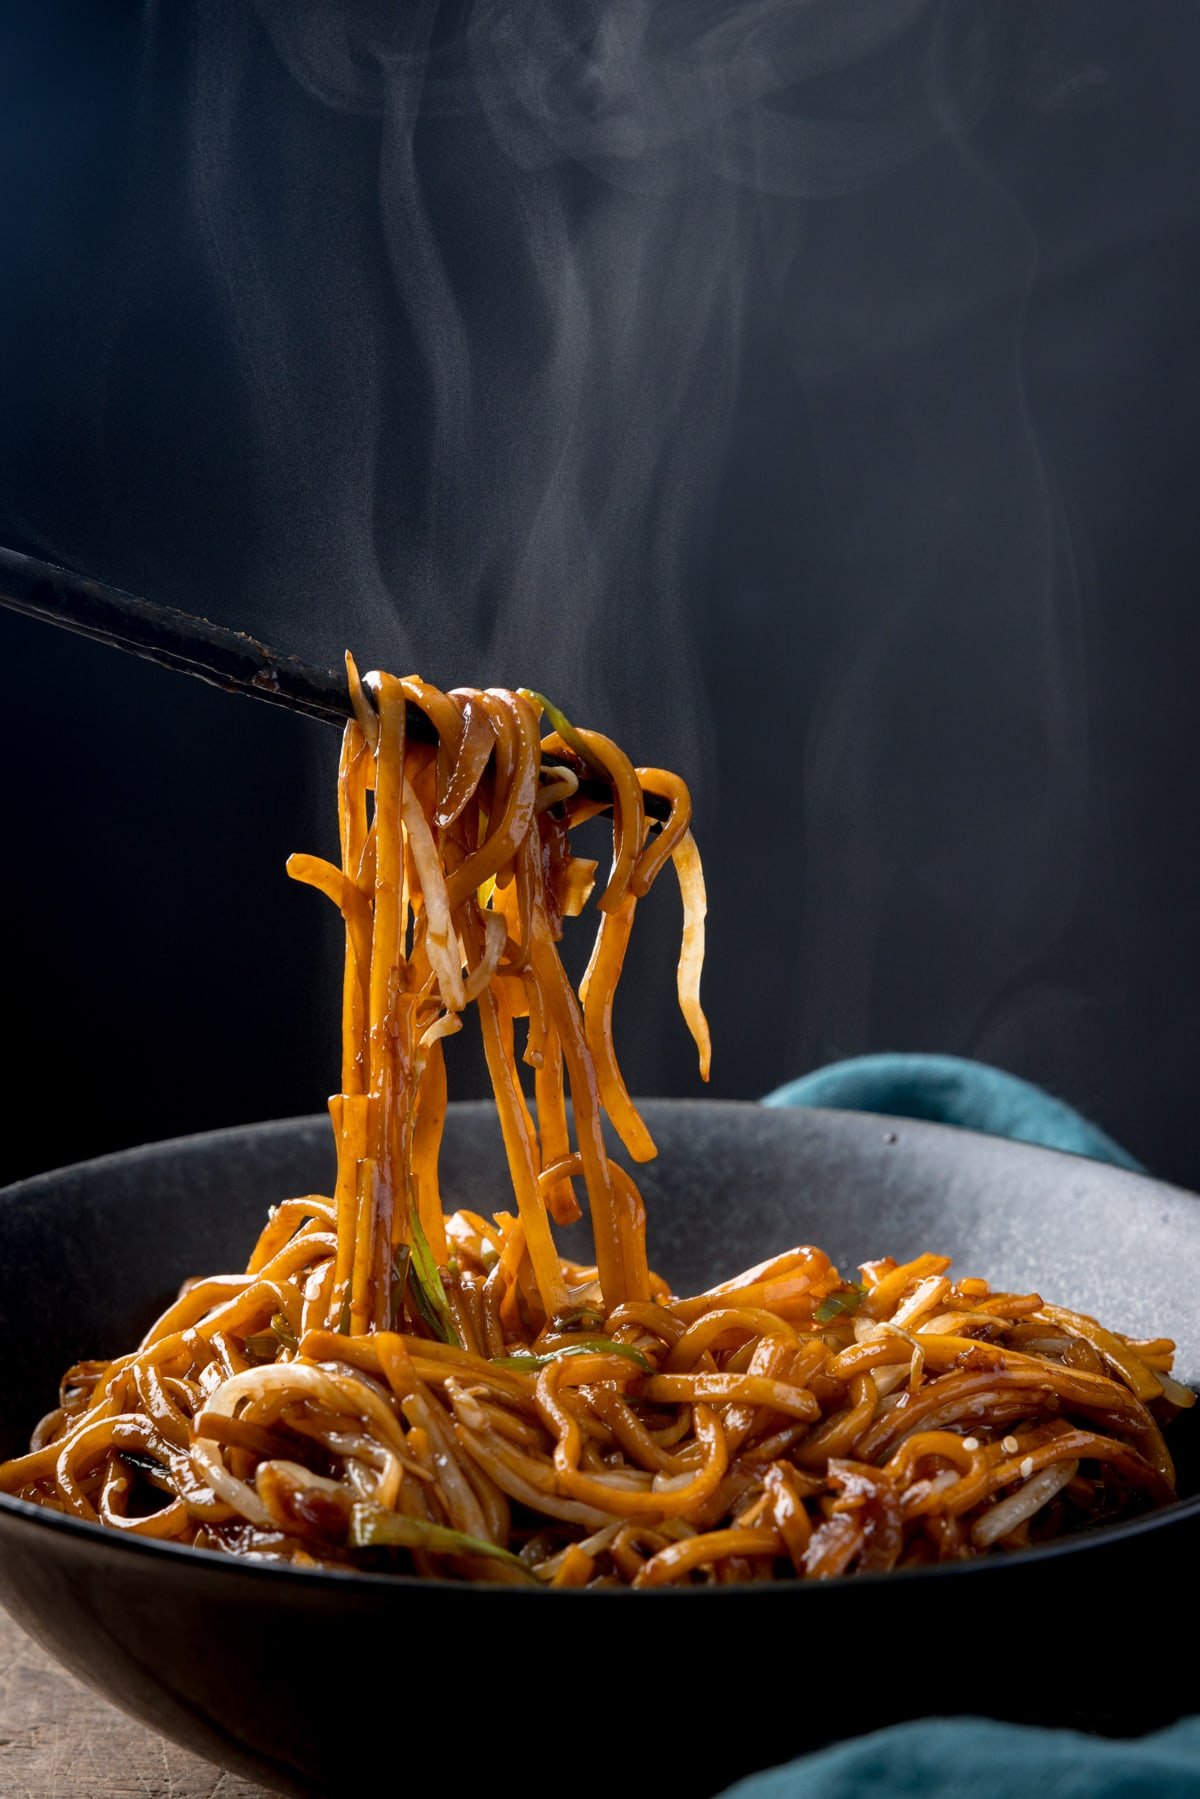 Tall side-on image of stir-fried noodles with beansprouts in a black bowl, with sesame seeds sprinkled on top. Some of the noodles are being lifted from the bowl with a set of black wooden chopsticks. There is steam rising from the bowl. The bowl is on a wooden table next to a teal napkin, against a dark background.